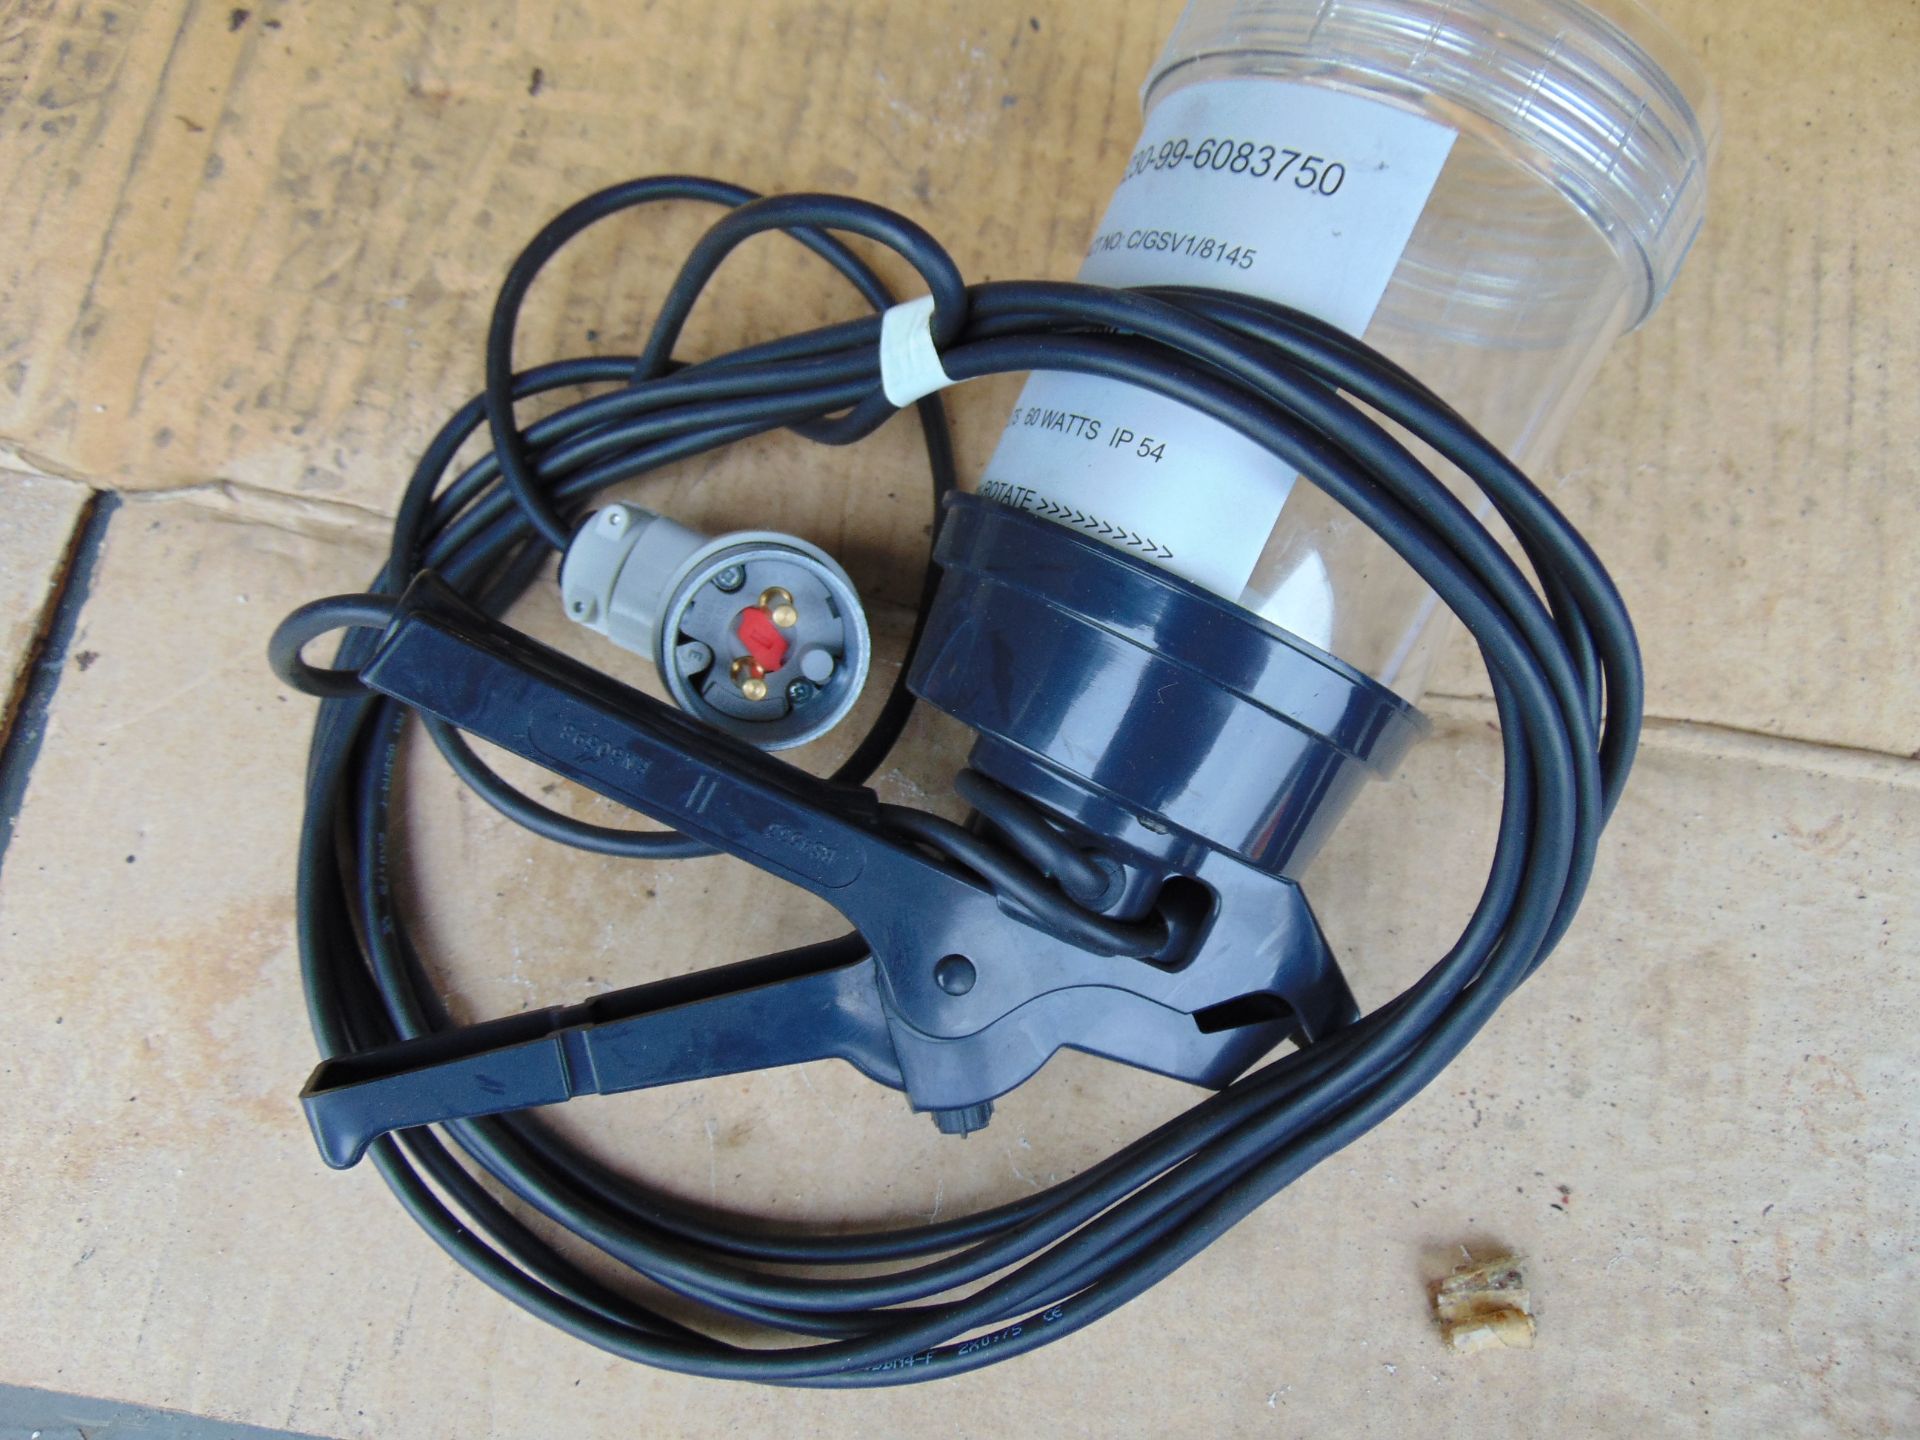 New Unissued Smith and Prince 24v Inspection Lamp - Image 2 of 5